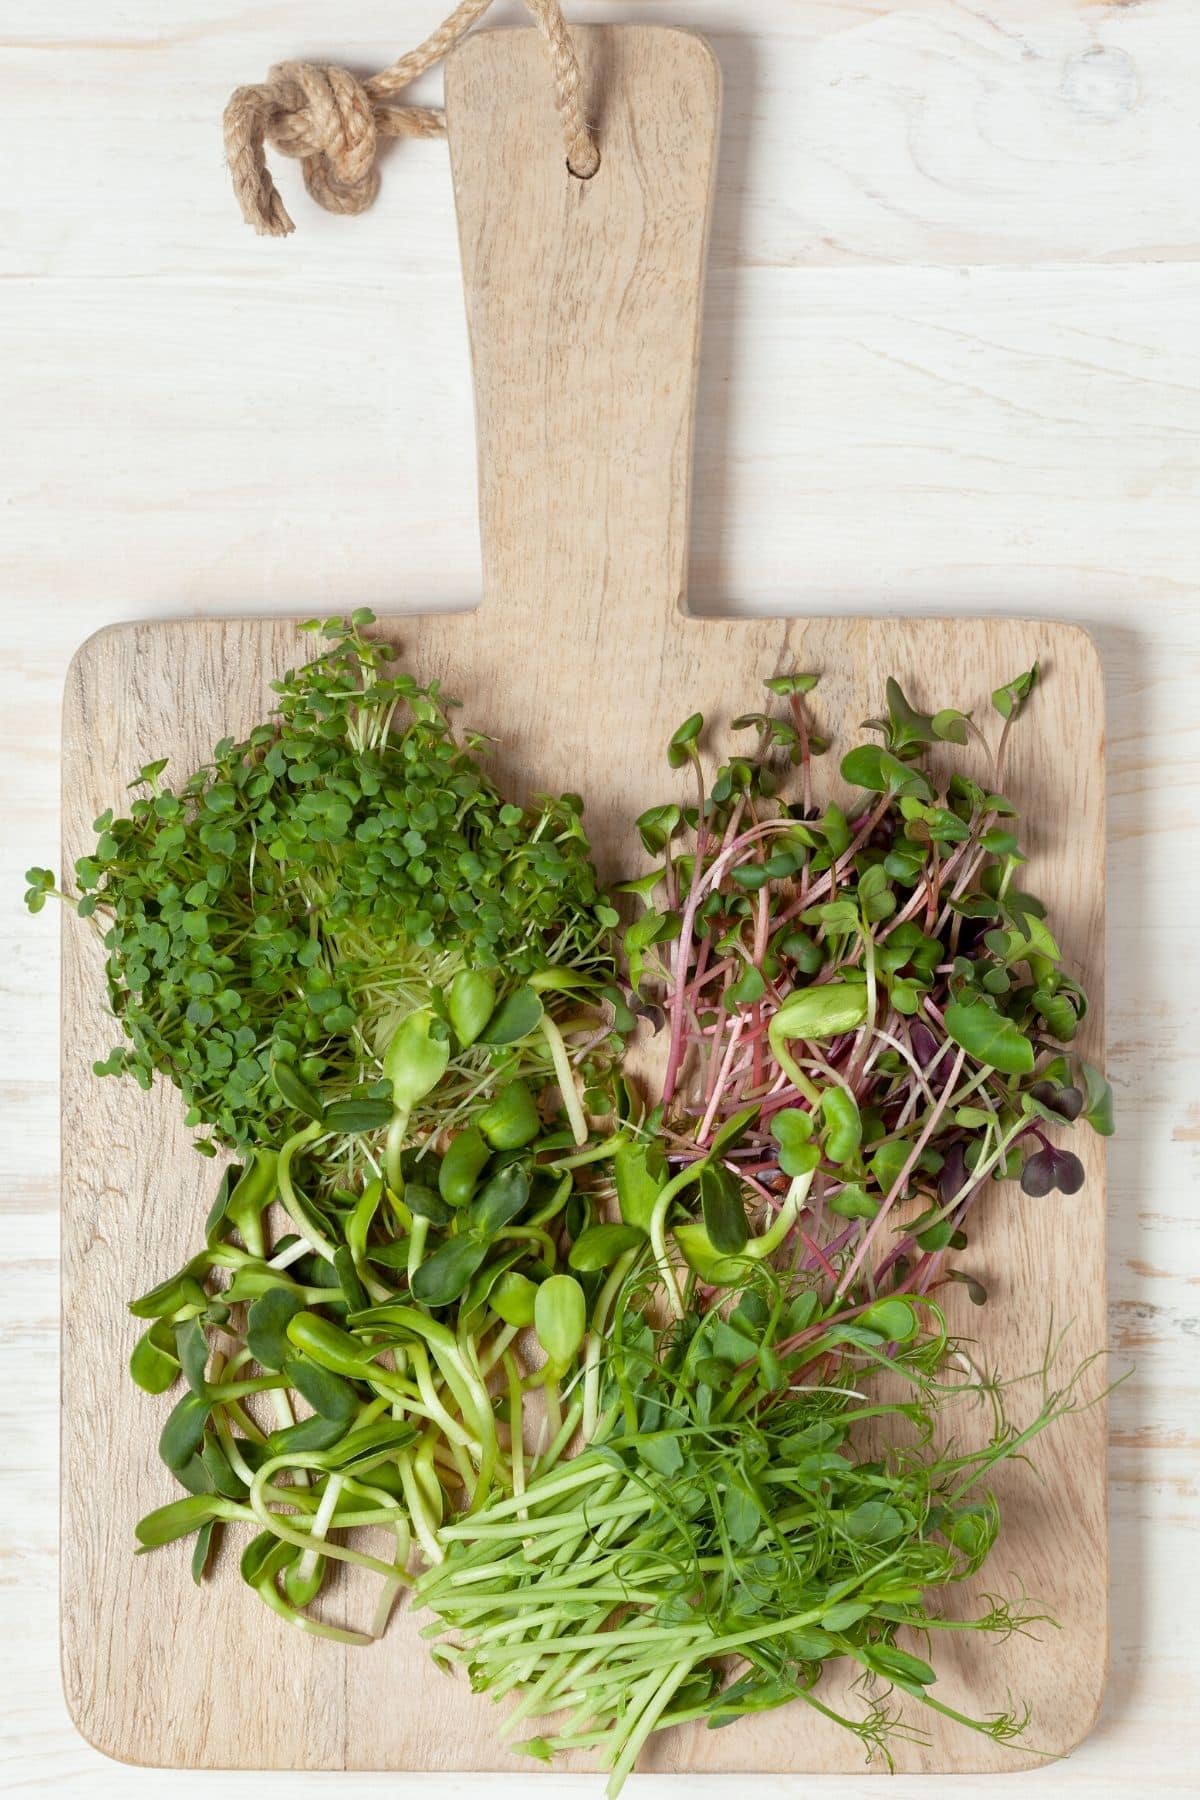 variety of sprouts and microgreens on a cutting board.